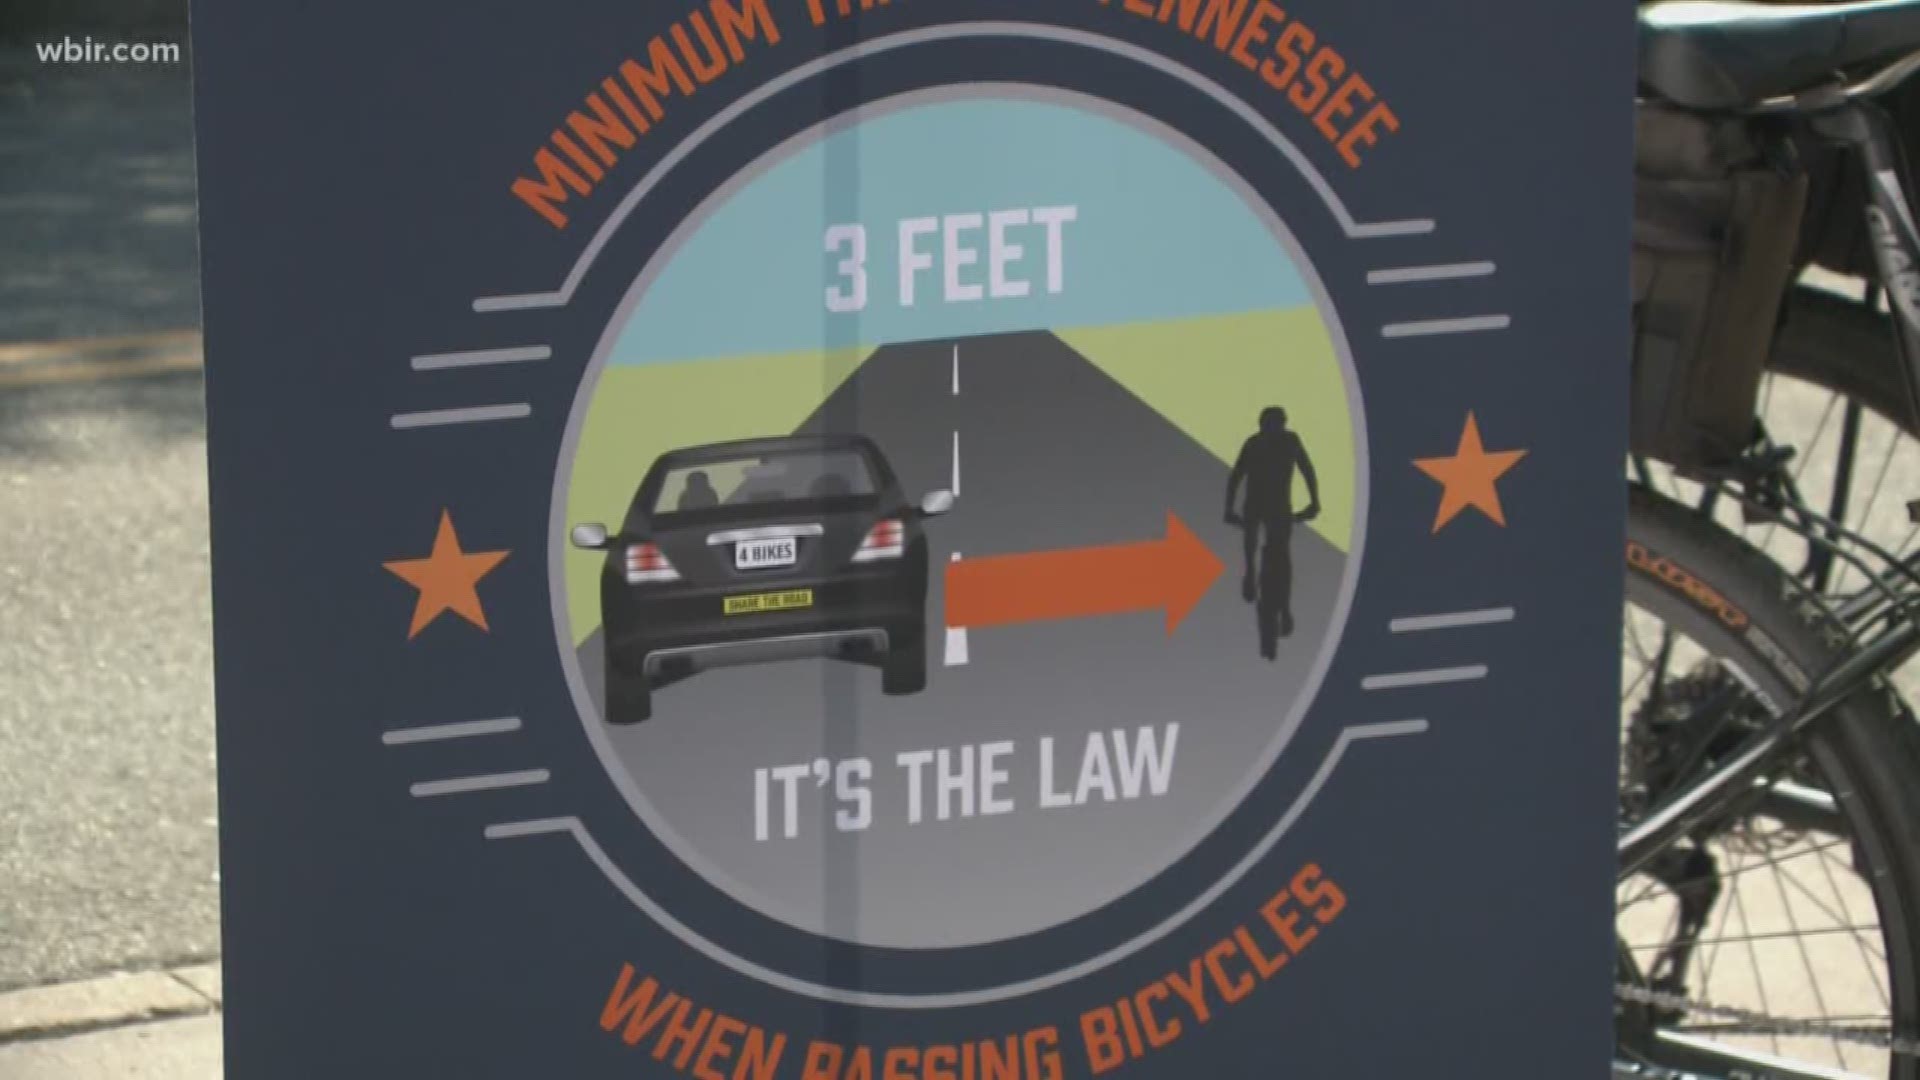 A new campaign is underway to remind drivers about how close they can get to bicyclists. Sept. 20, 2018